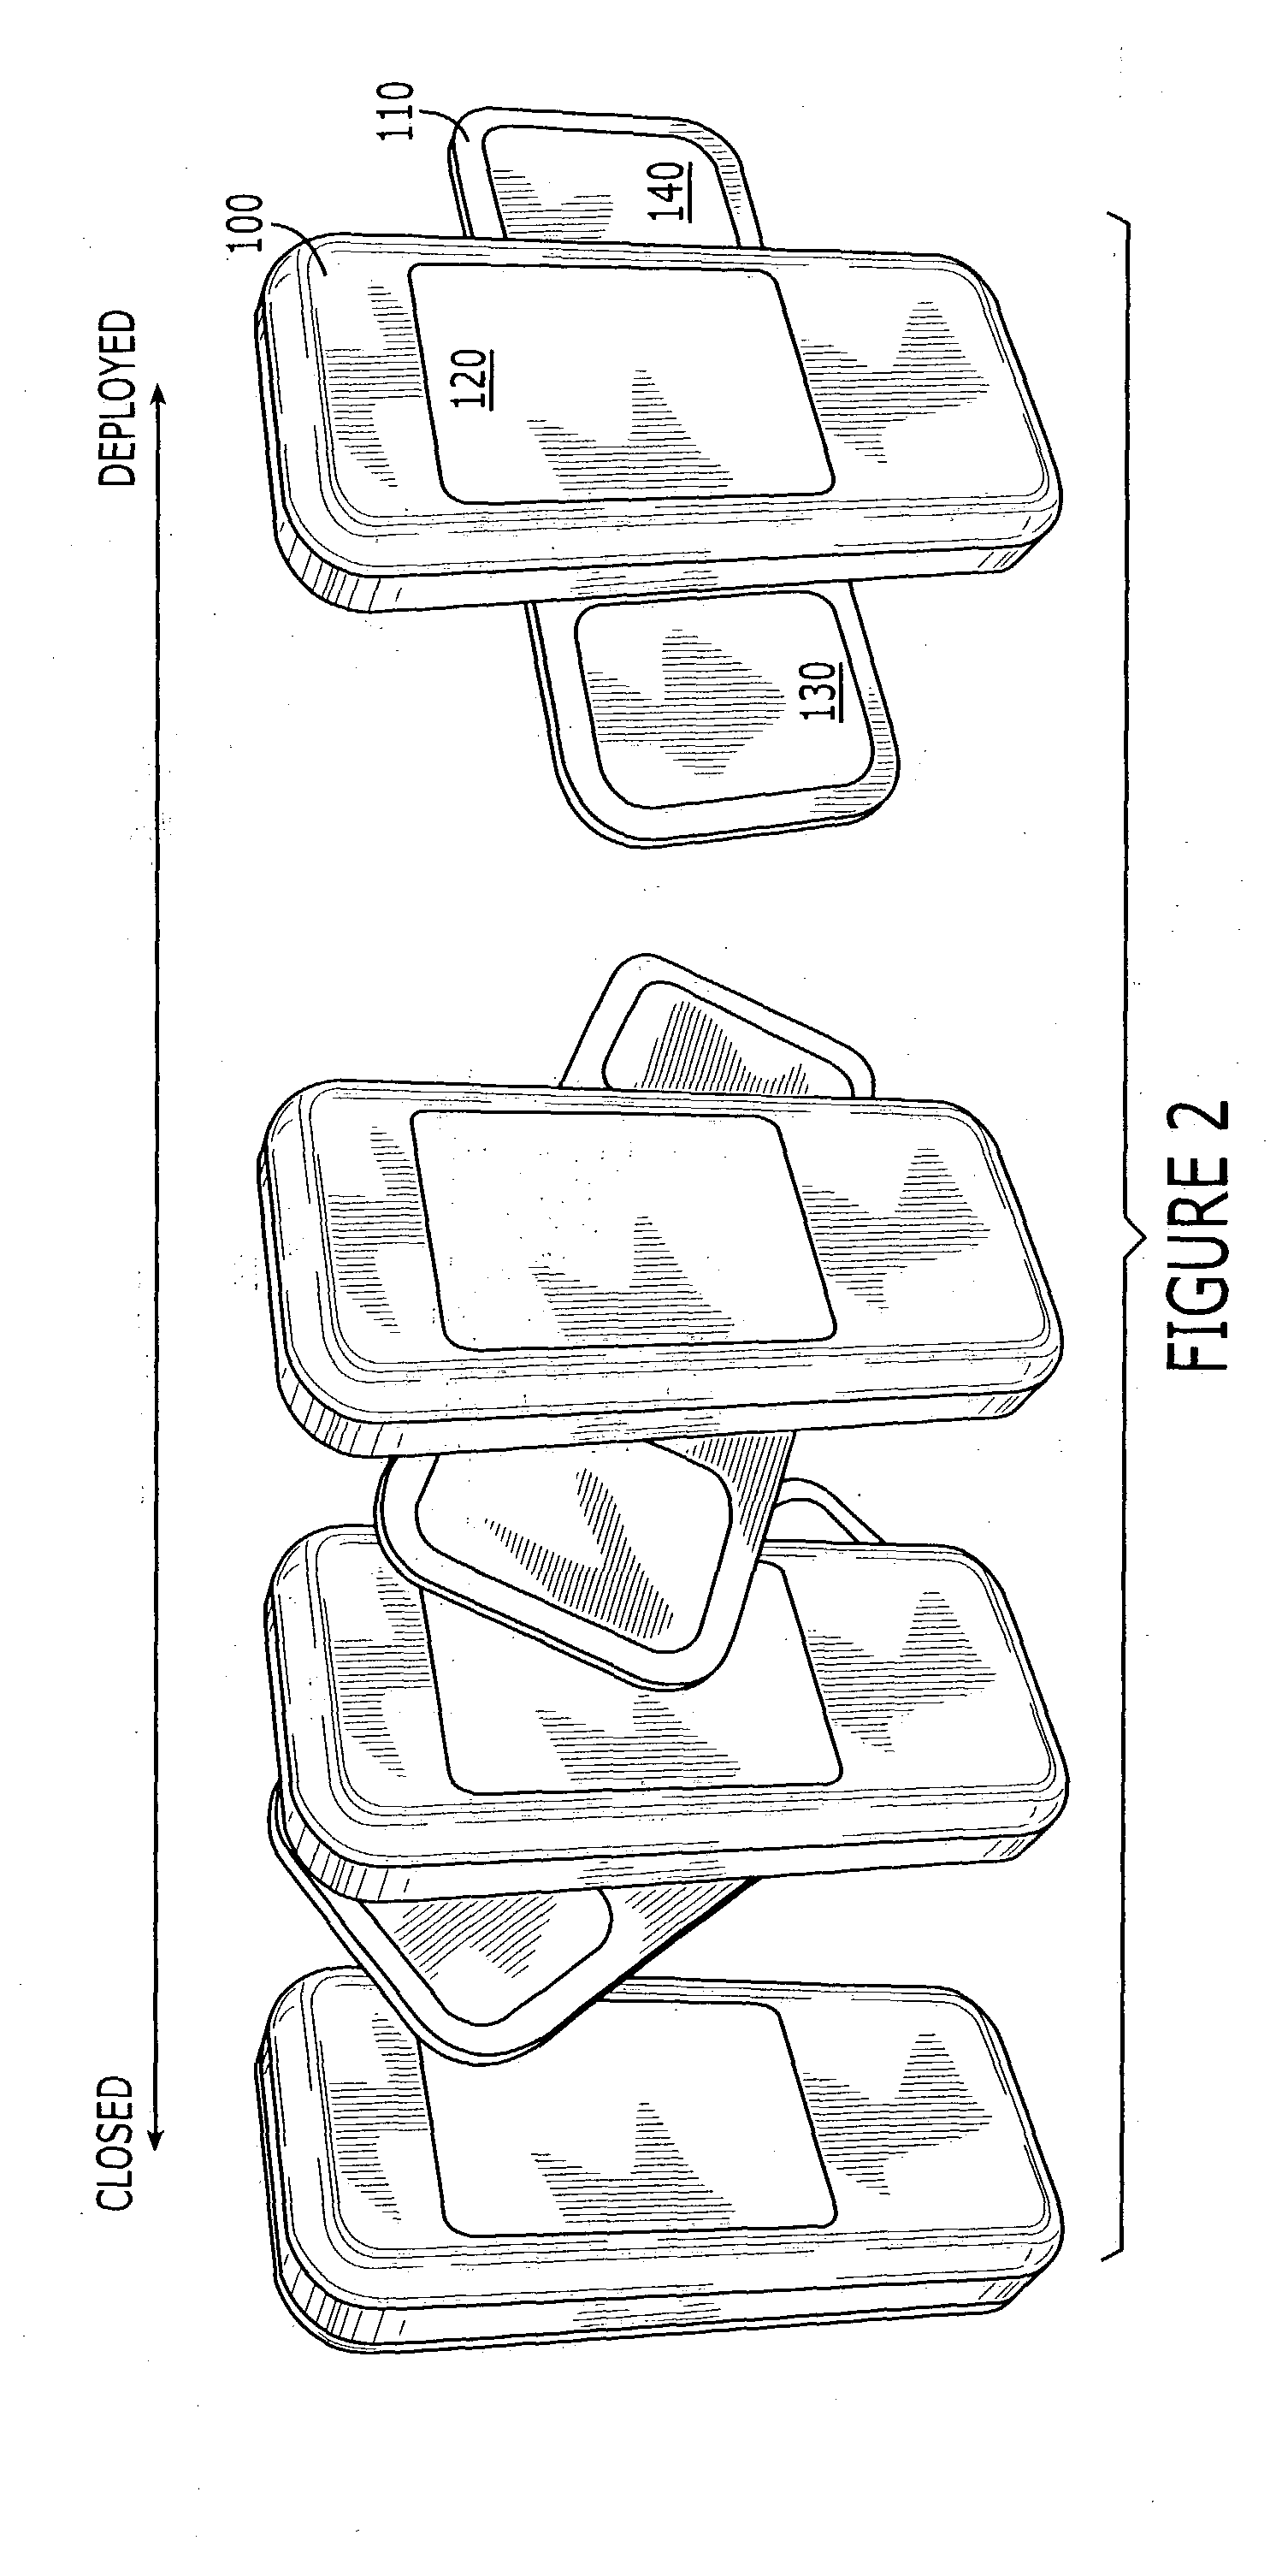 Mobile computing devices having rotationally exposed user interface devices